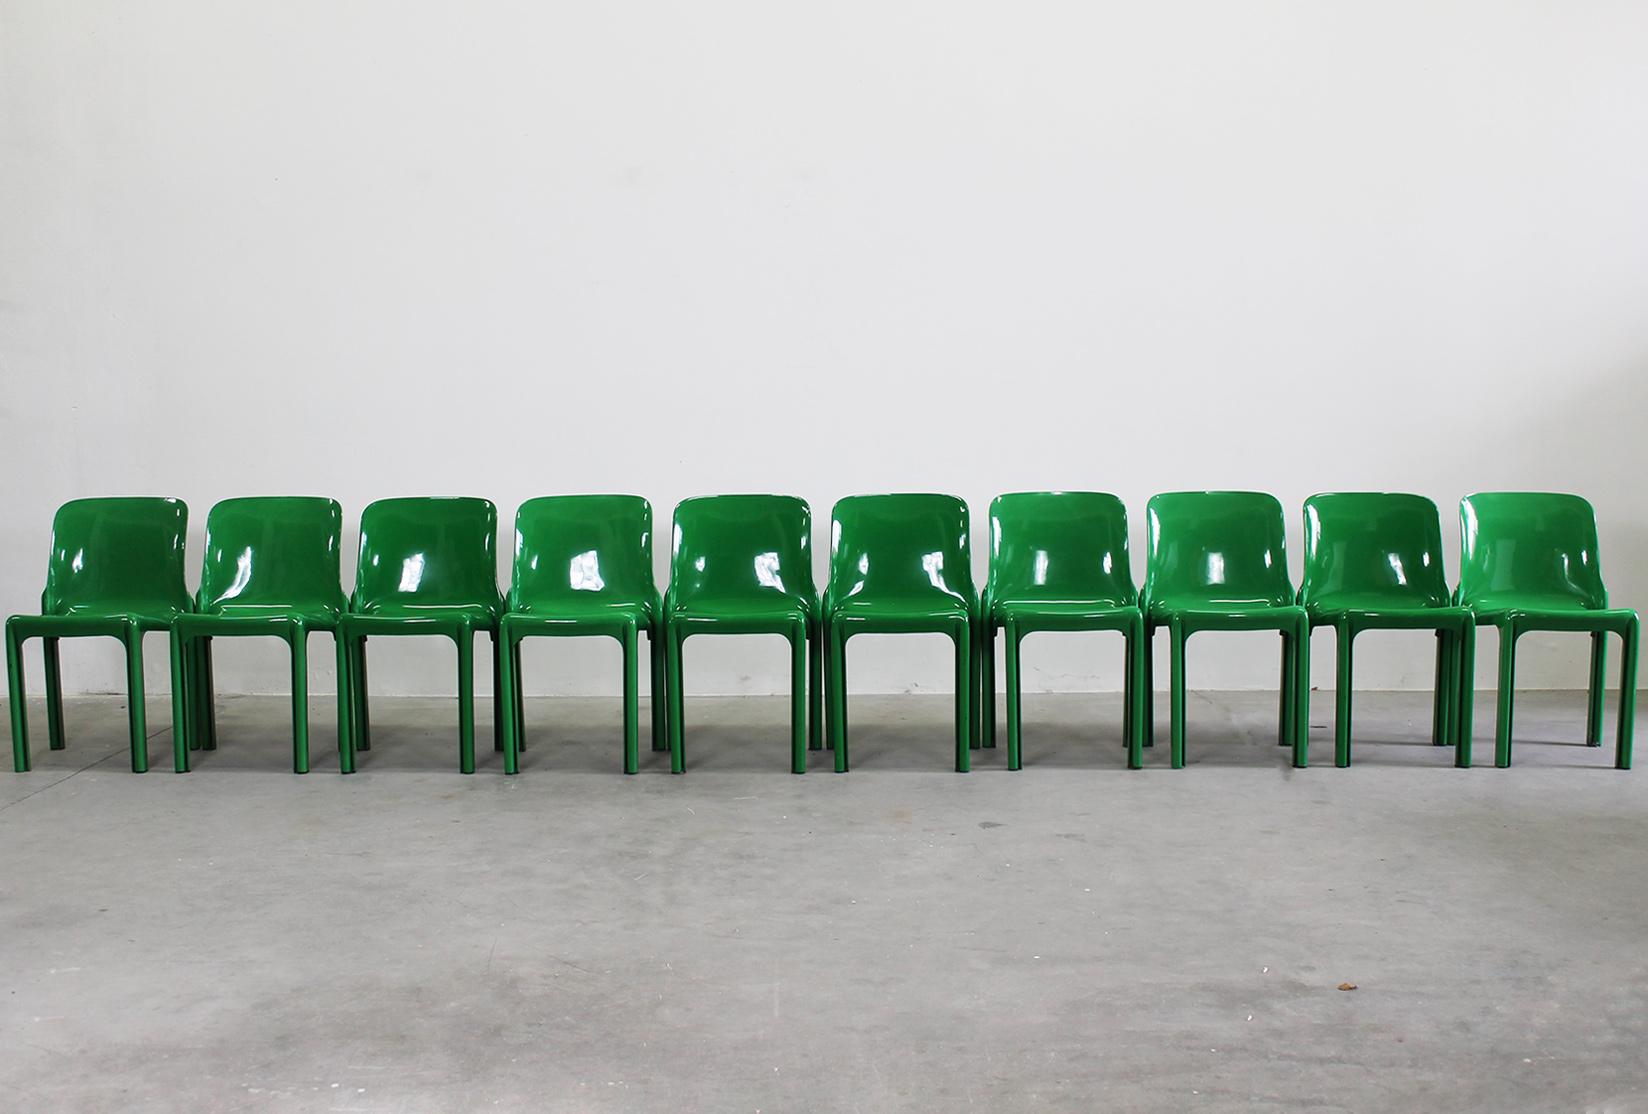 Set of ten Selene stackable chairs in green plastic, designed by Vico Magistretti in 1966 and produced by Arteminde Milano from the 1969 to the 1990.

The Selene chair was designed in 1966 by Magistretti to be produced in a plastic material, as he